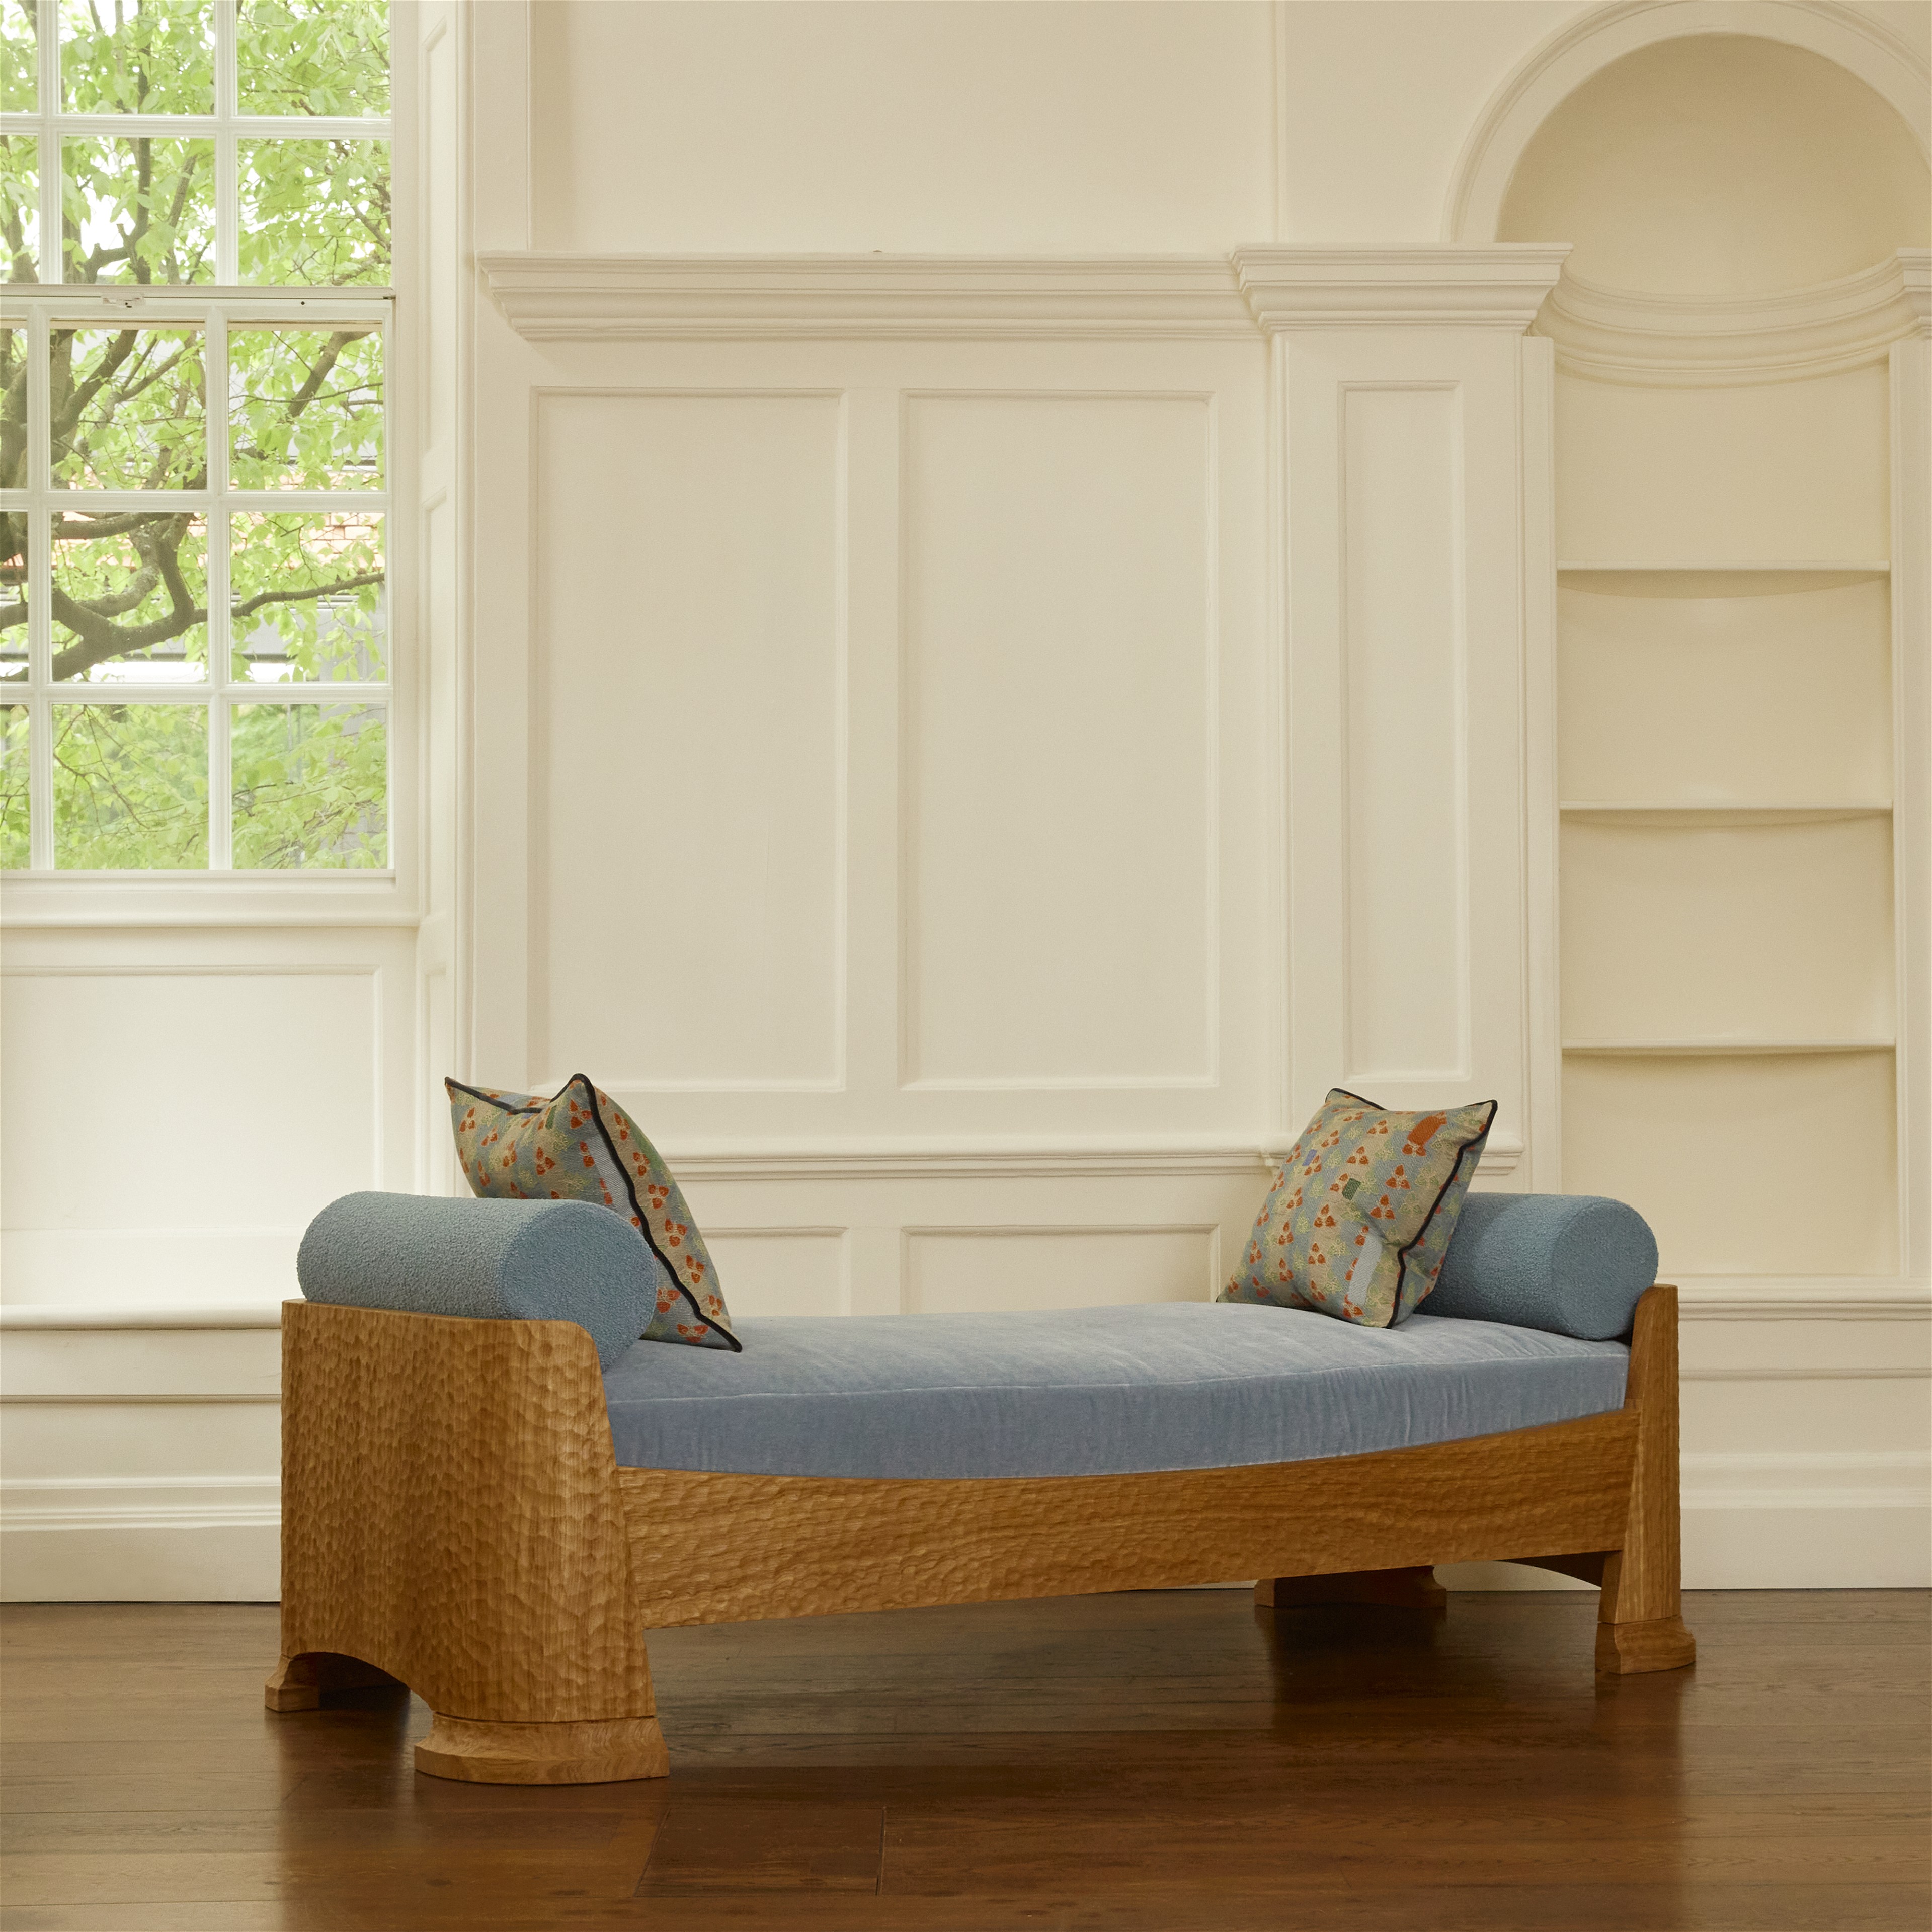 a wooden bench with a blue cushion on it